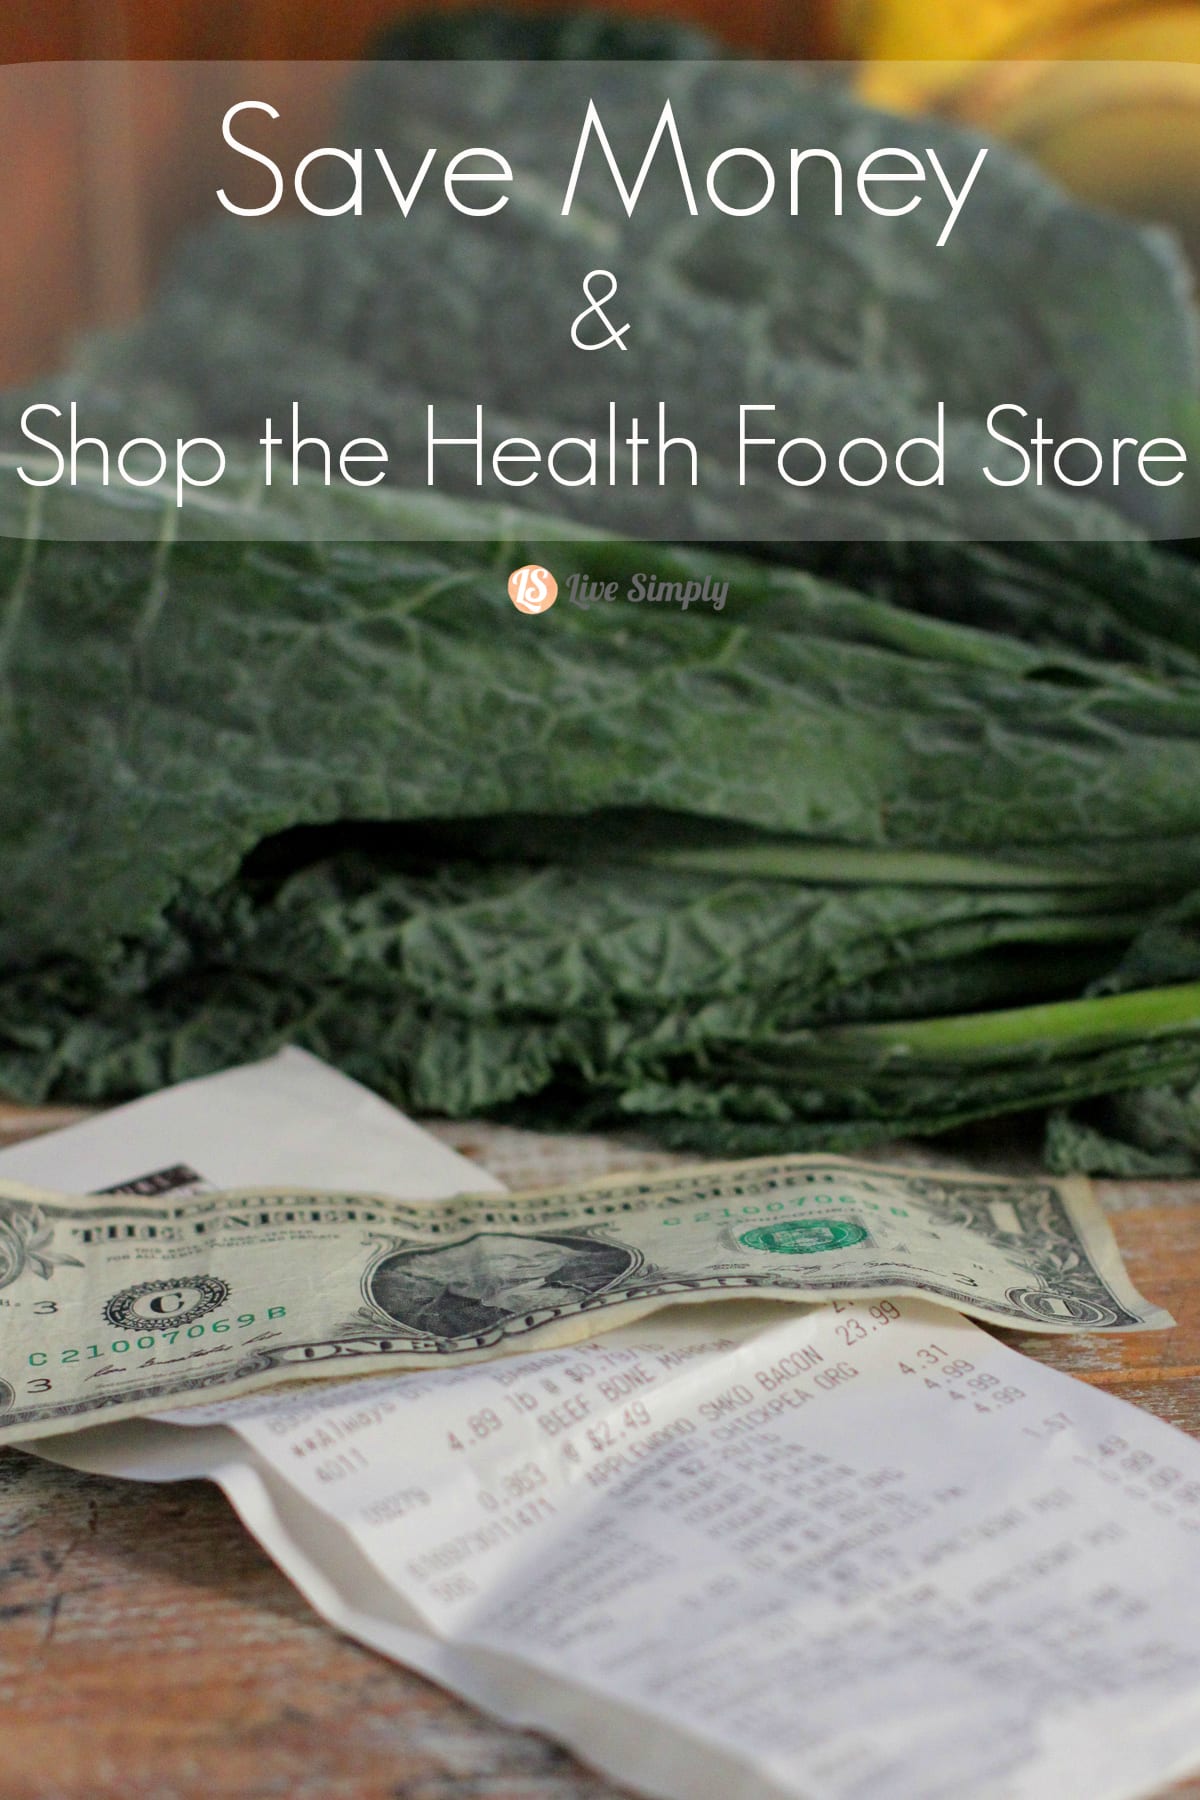 Save Money & Shop the Health Food Store